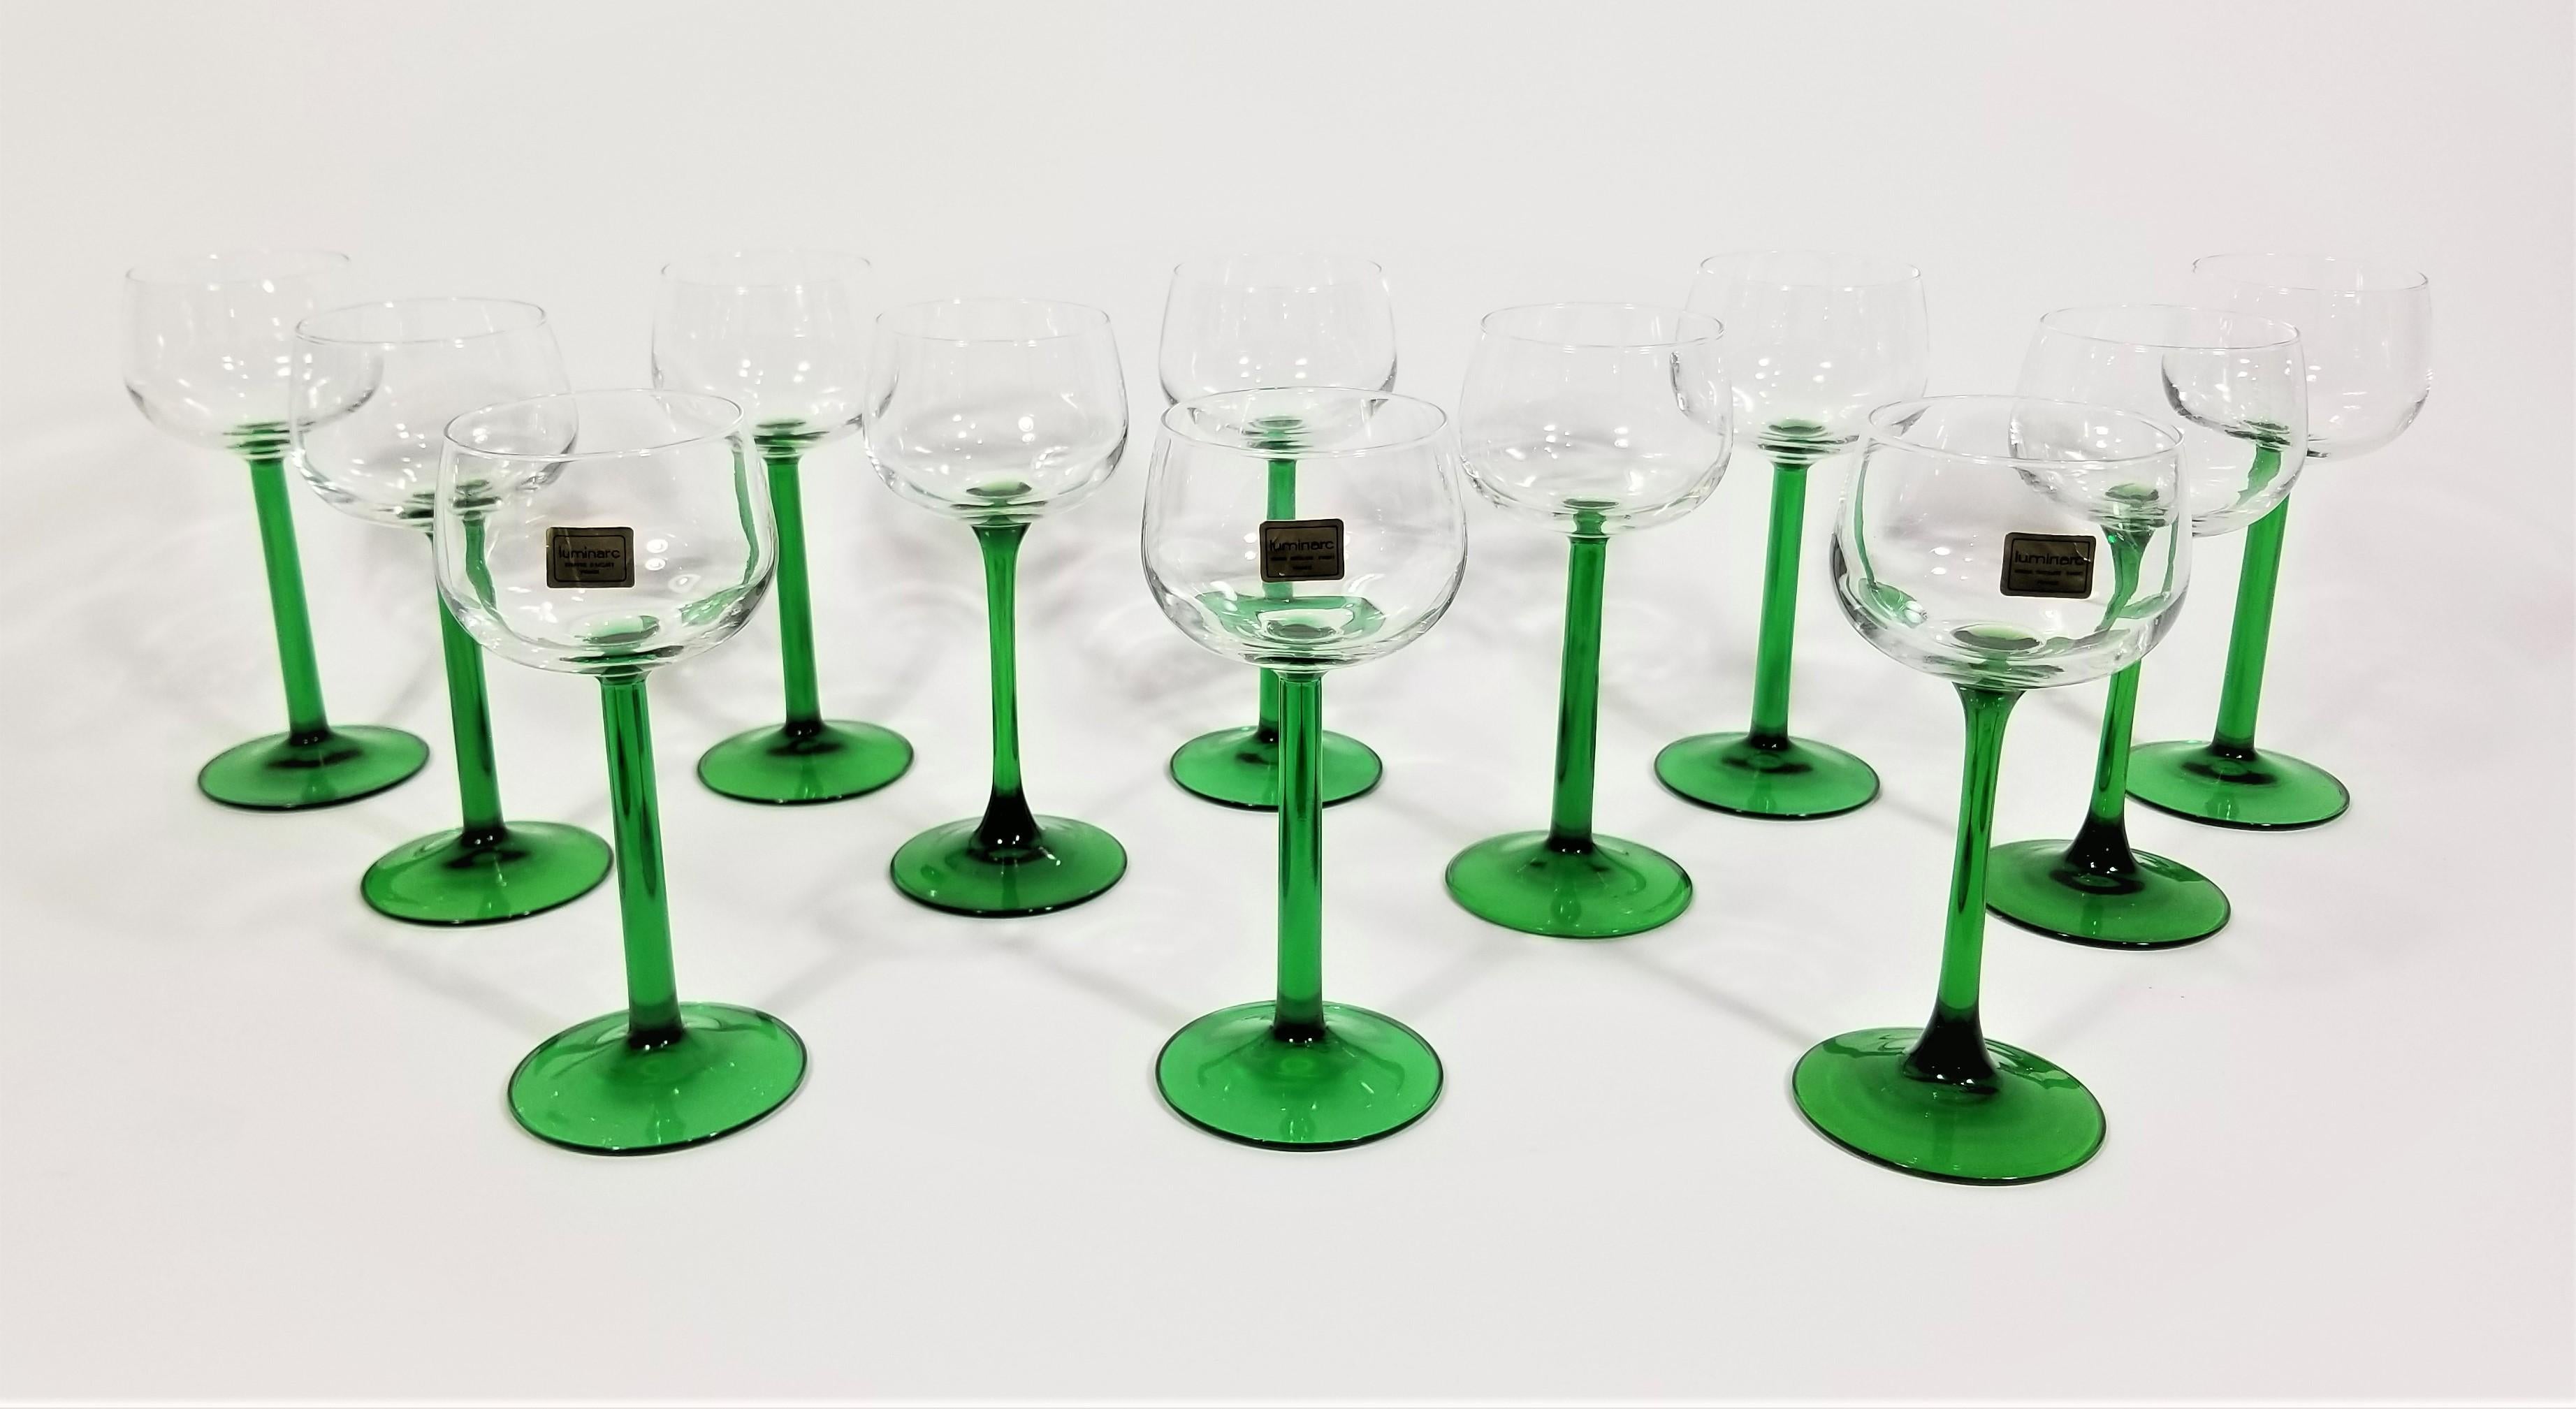 Mid century 1970s green jeweled toned French luminarc glassware barware. Tulip base. All glasses marked france. Set of 12. Excellent condition.